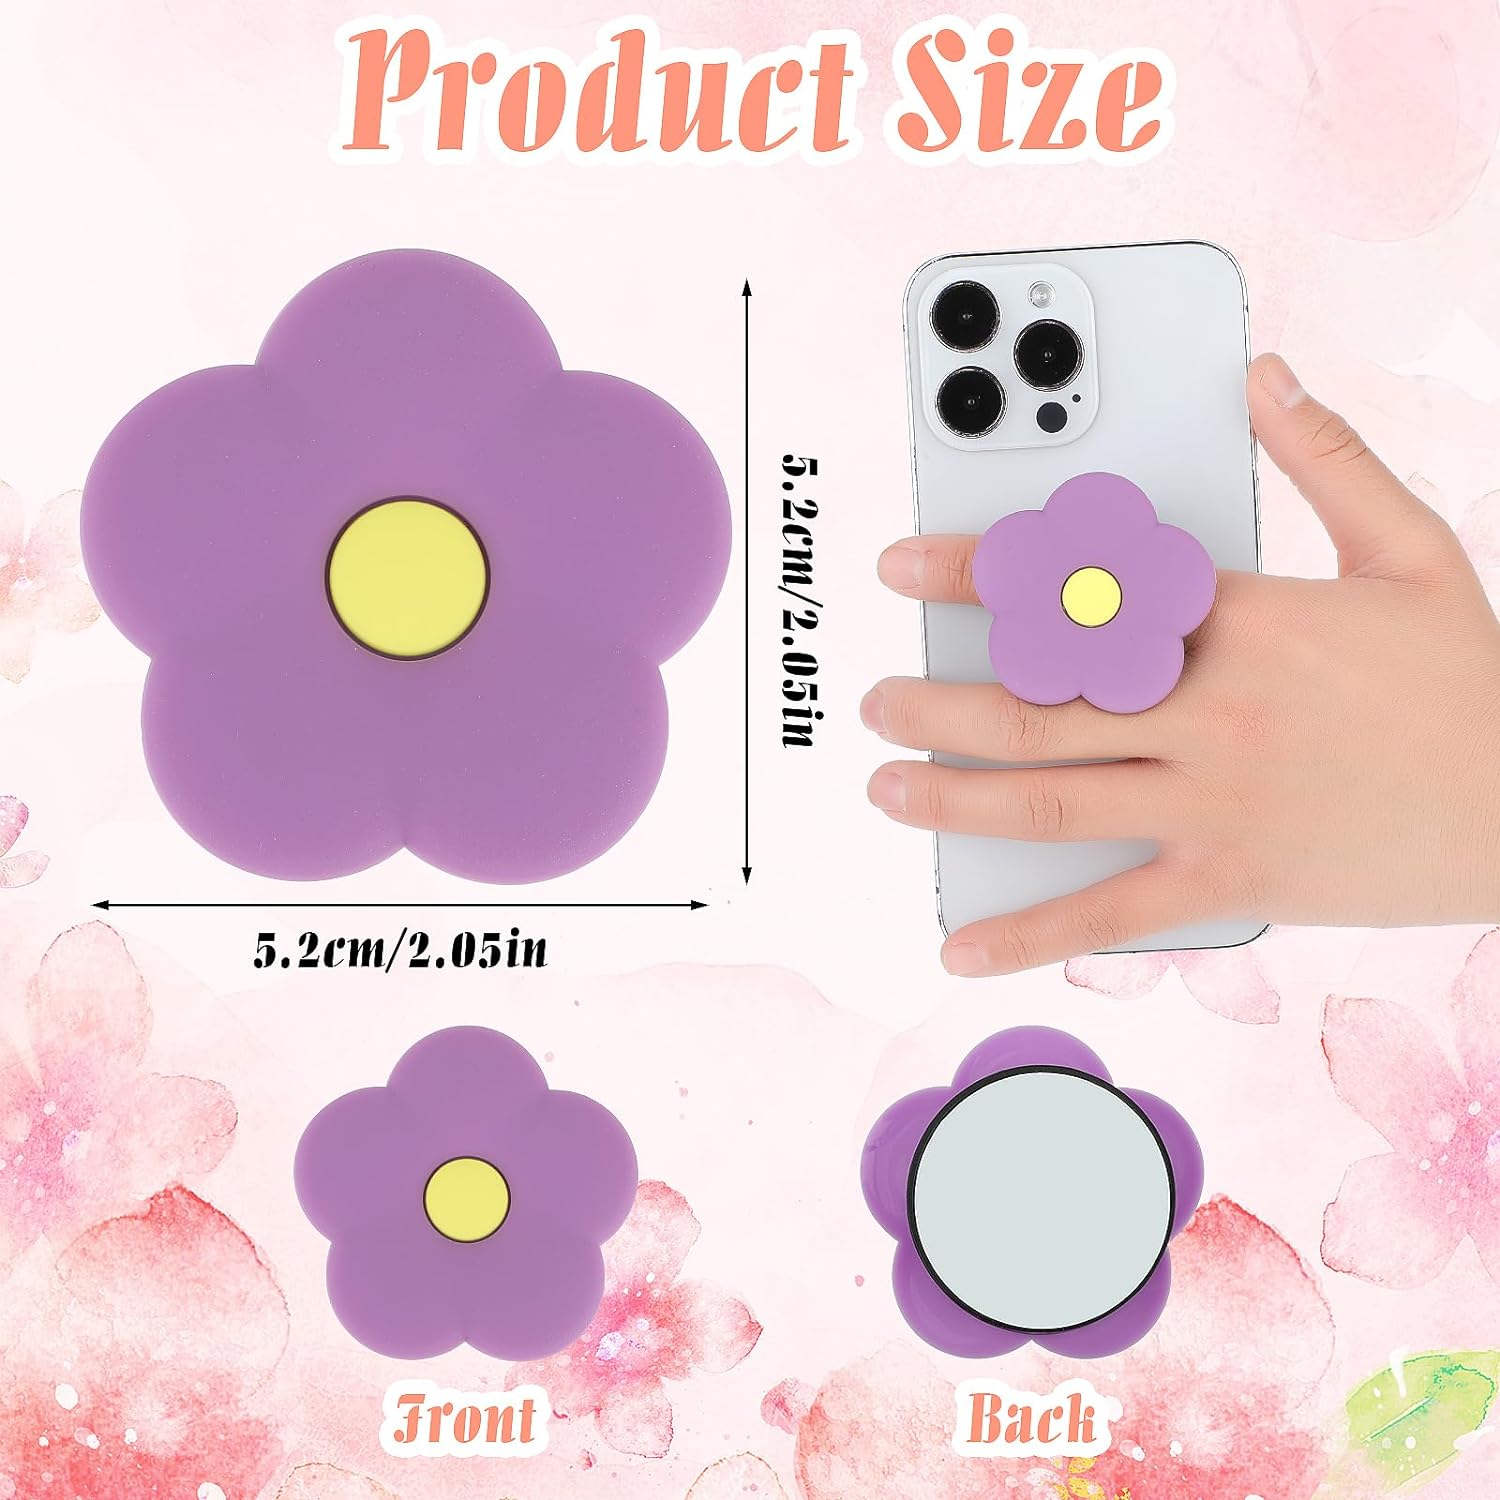 Ouligay Purple Daisy Silicone Mobile Phone Grip Stand, Cute 2d Flower Cell Phone Holder, Collapsible Expandable Cell Phone Accessory for Smartphone Tablet Cell Phone Accessory - Amazing Gadgets Outlet